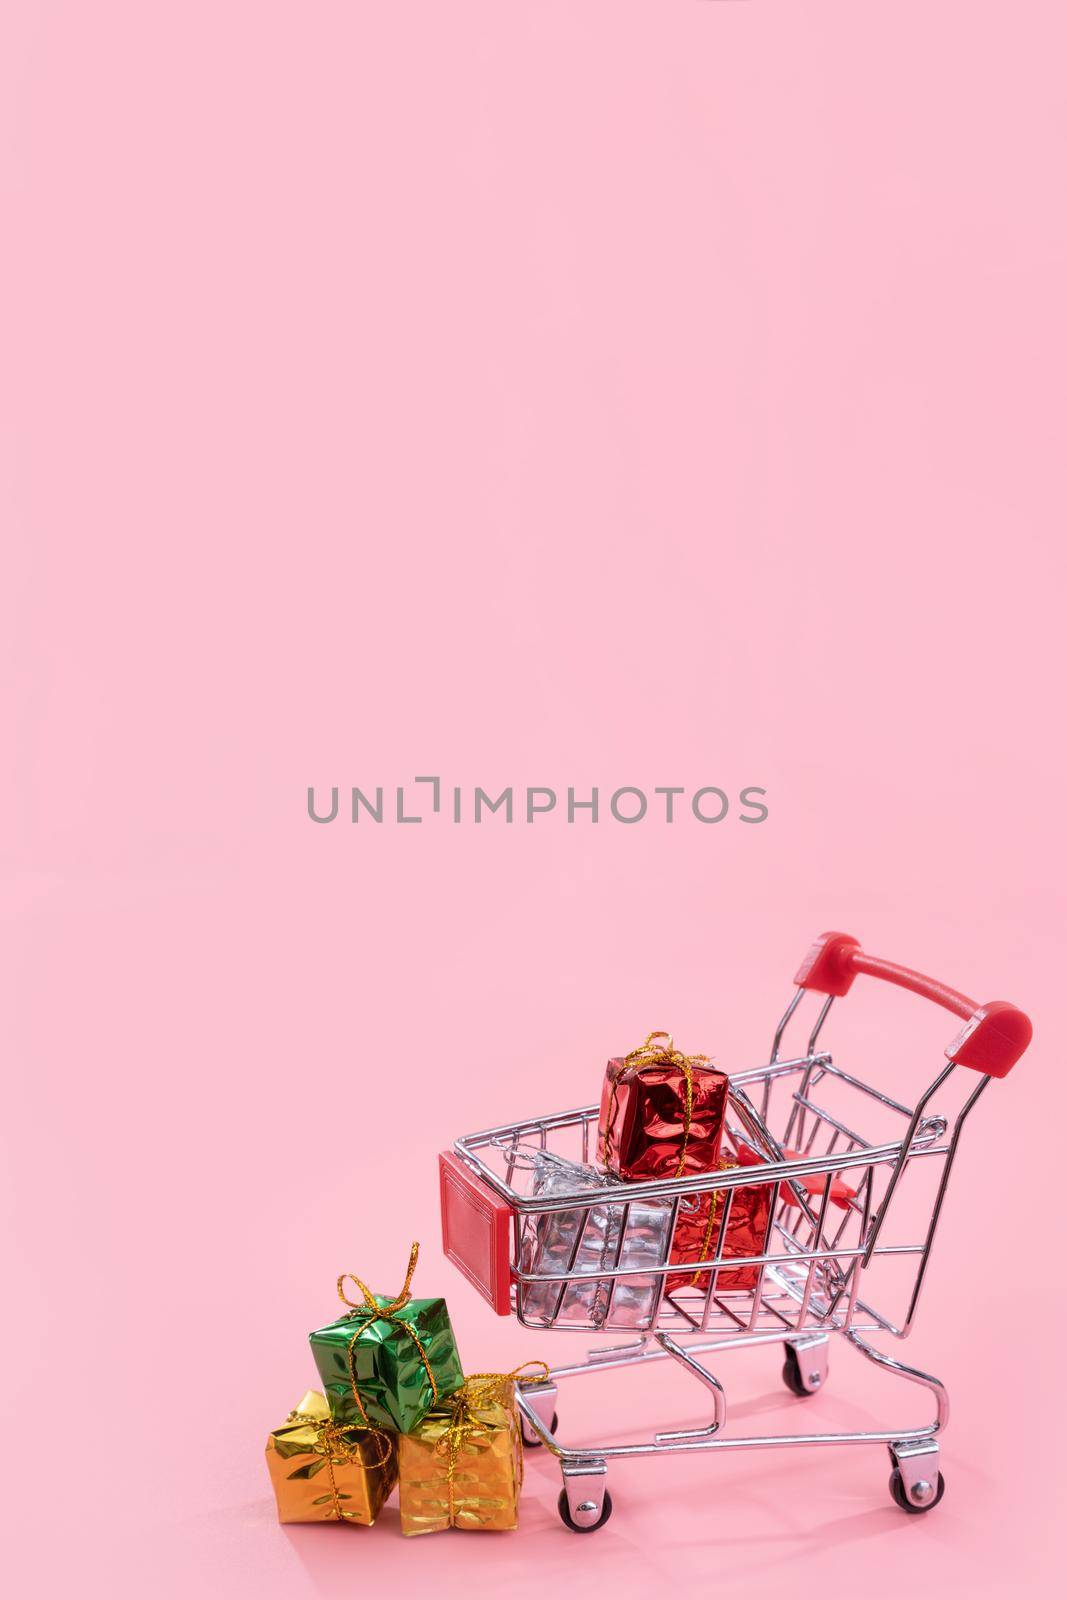 Annual sale, Christmas shopping season concept - mini red shop cart trolley full of gift box isolated on pale pink background, copy space, close up by ROMIXIMAGE